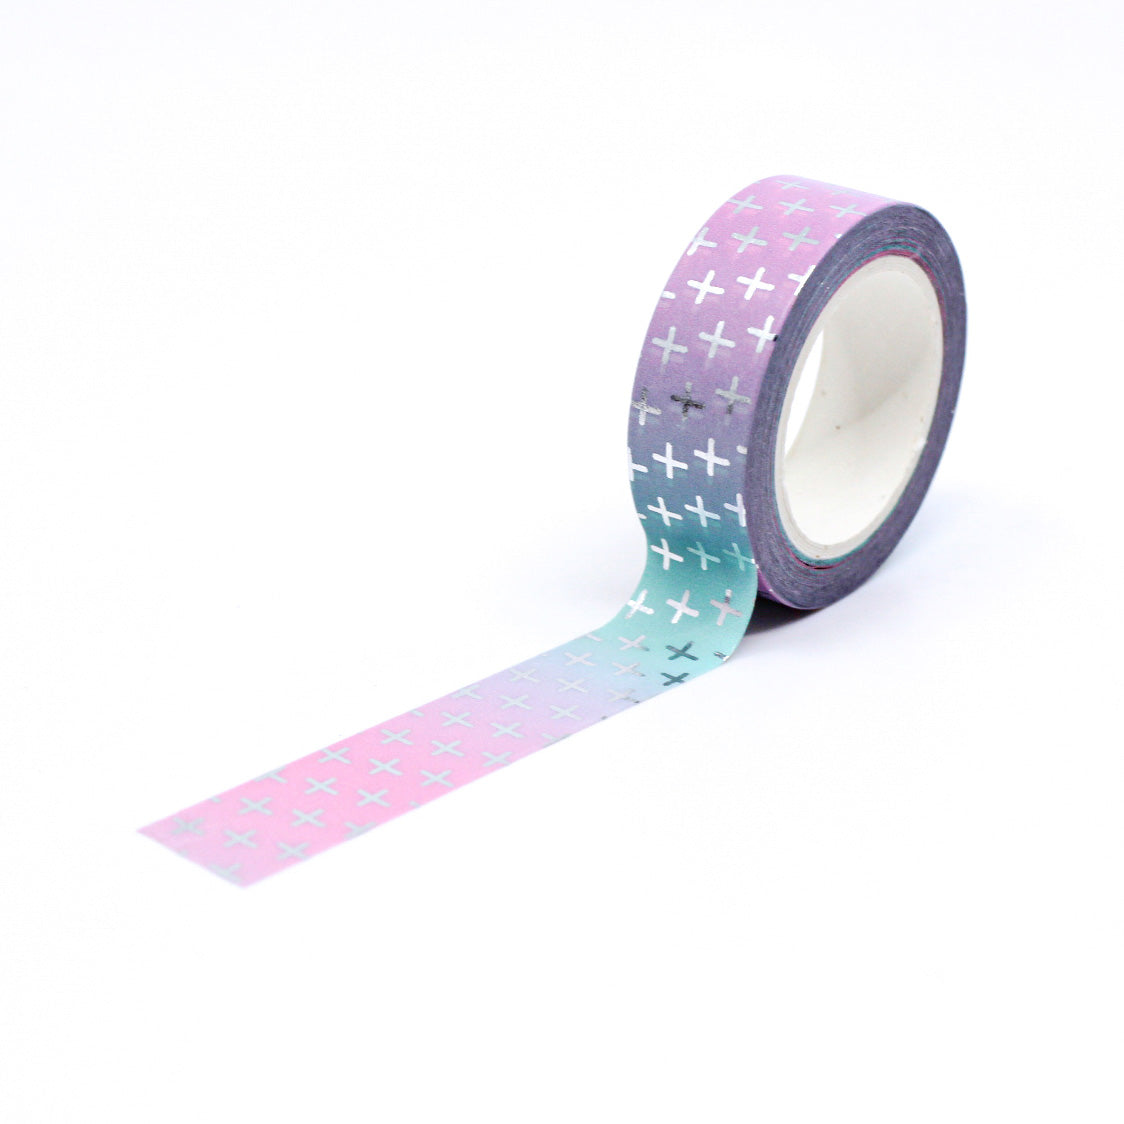 Elevate your faith-inspired projects with our Modern Silver Foil Cross Washi Tape, featuring a stylish cross design in shimmering silver foil. Ideal for adding a touch of elegance to your religious crafts. This tape is sold at BBB Supplies Craft Shop.